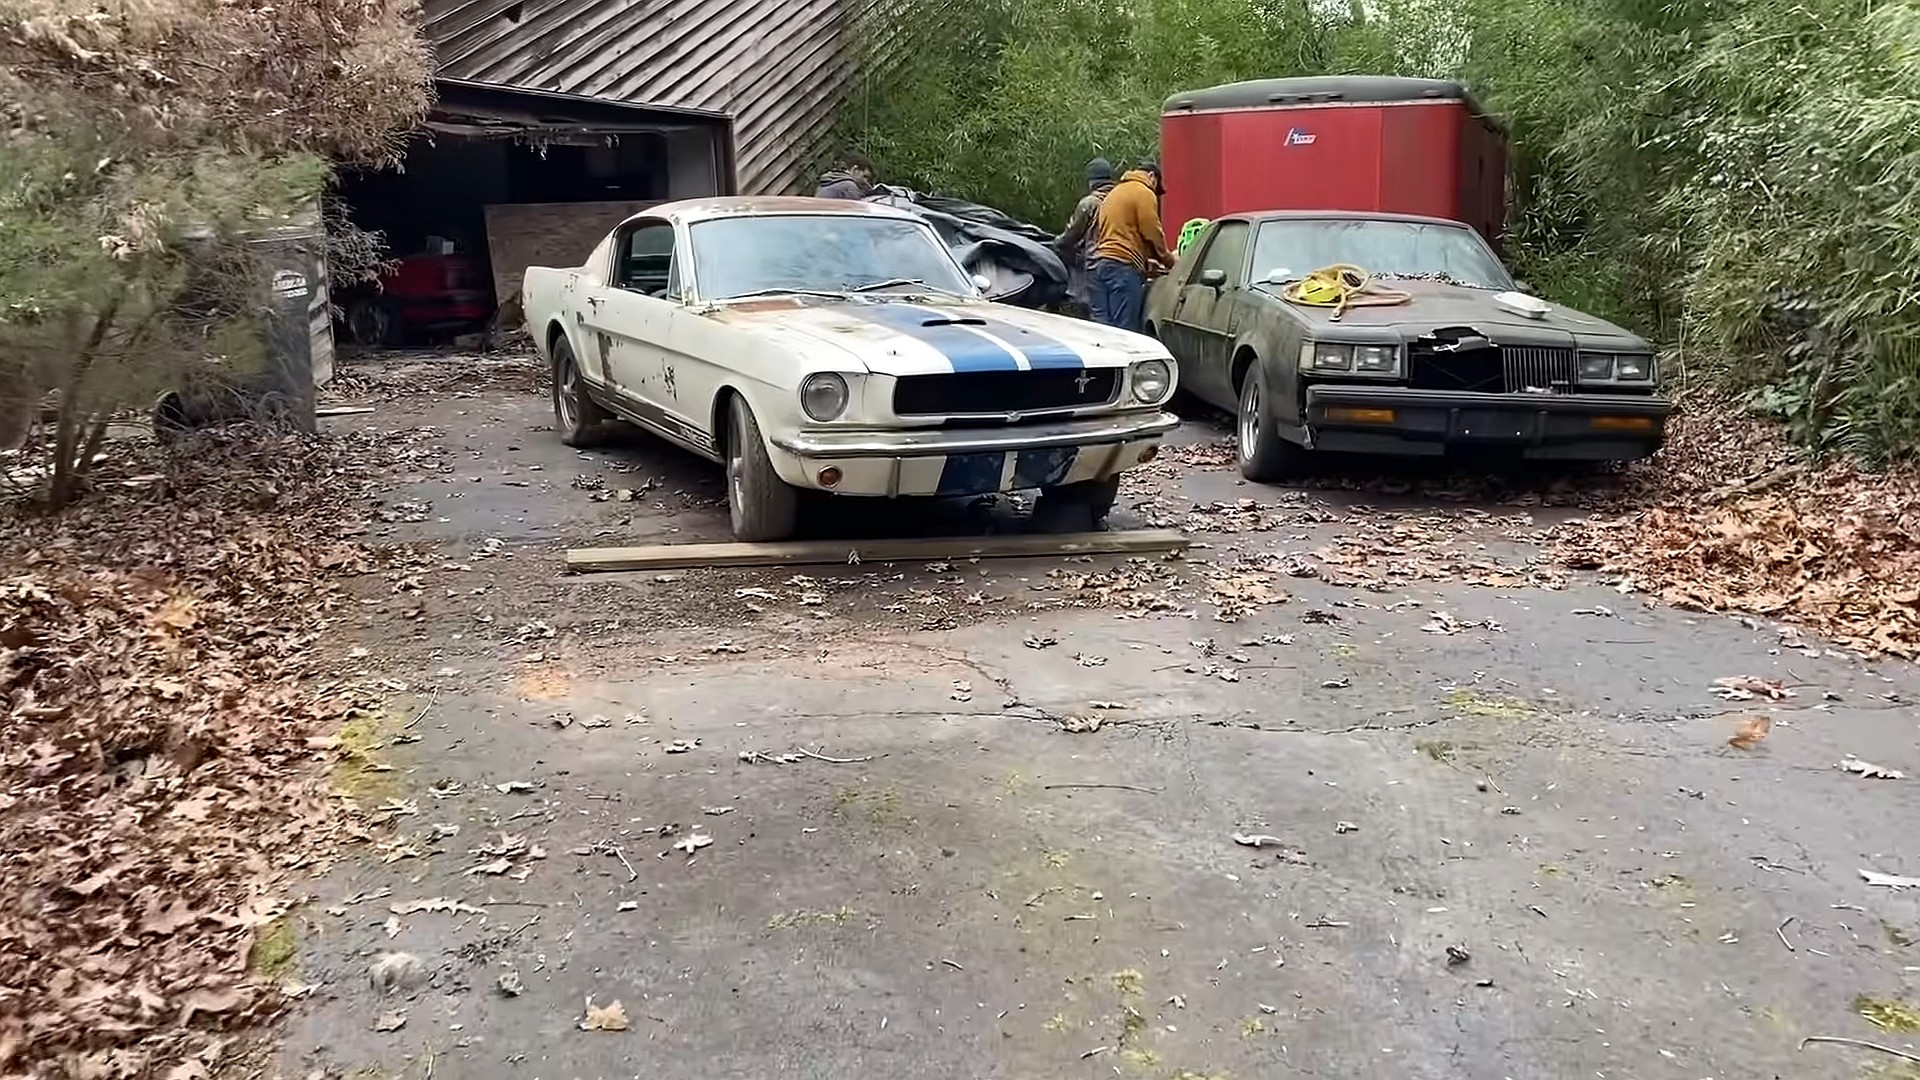 barn find gold 1965 shelby mustang gt350 stored for decades in abandoned house 4